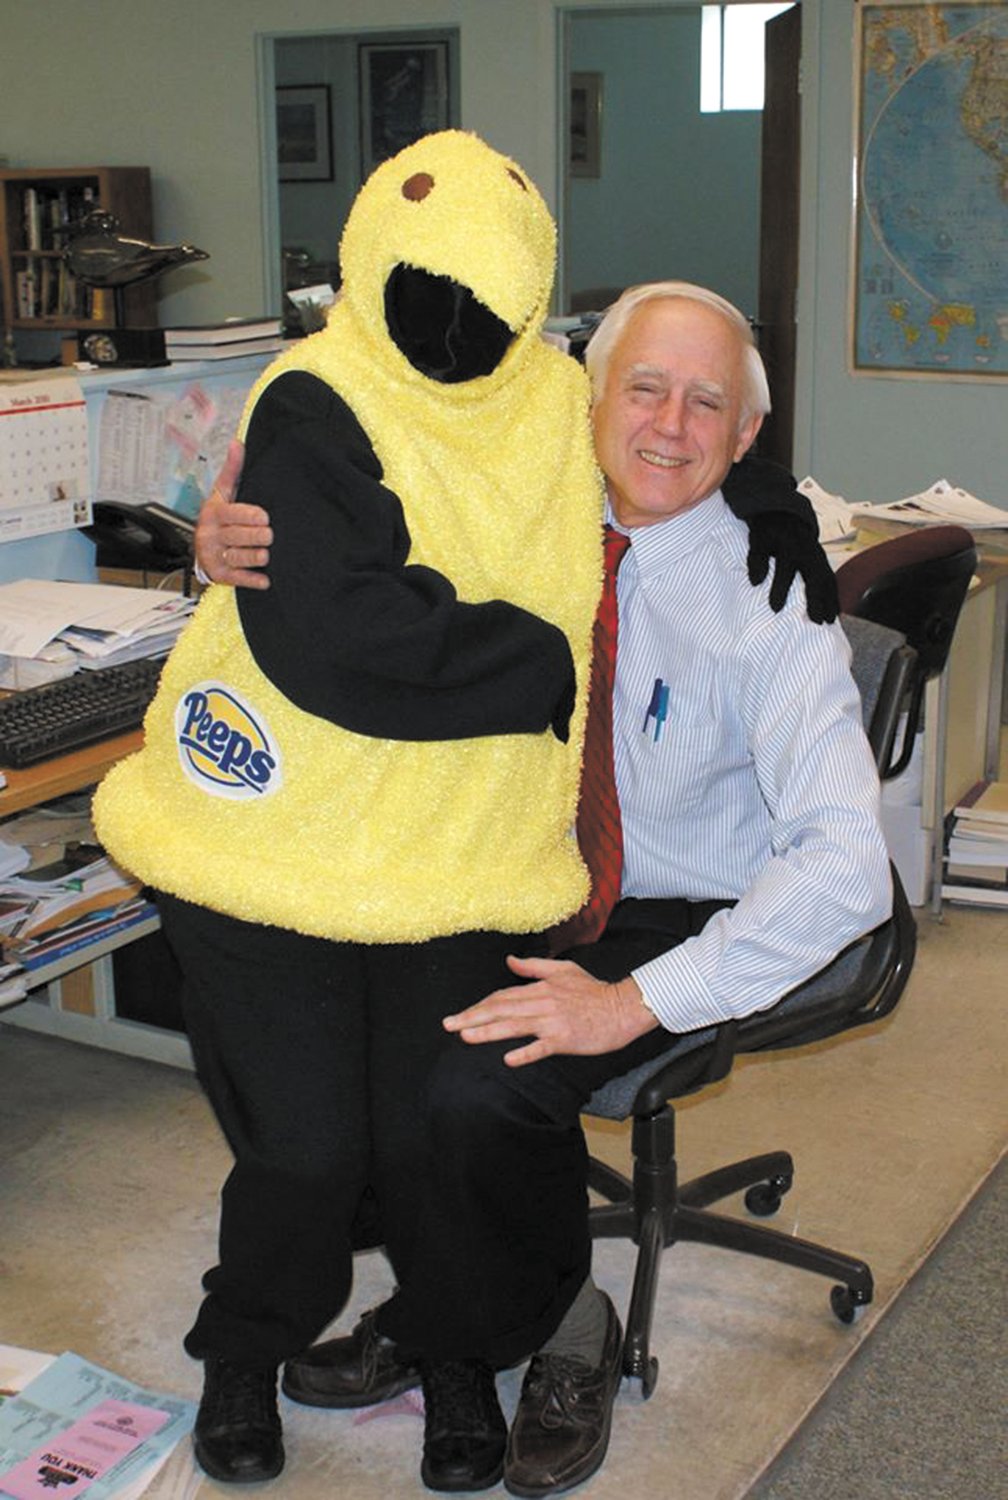 AND THEN SHE DRESSED AS A PEEP: After launching her “Peeps Show” with giant-sized hand held Peeps, Meri notched it up with a Peeps outfit which she wore into the Beacon Communications (Beacon, Herald and Sun Rise) office. Here she shows it off to publisher John Howell.